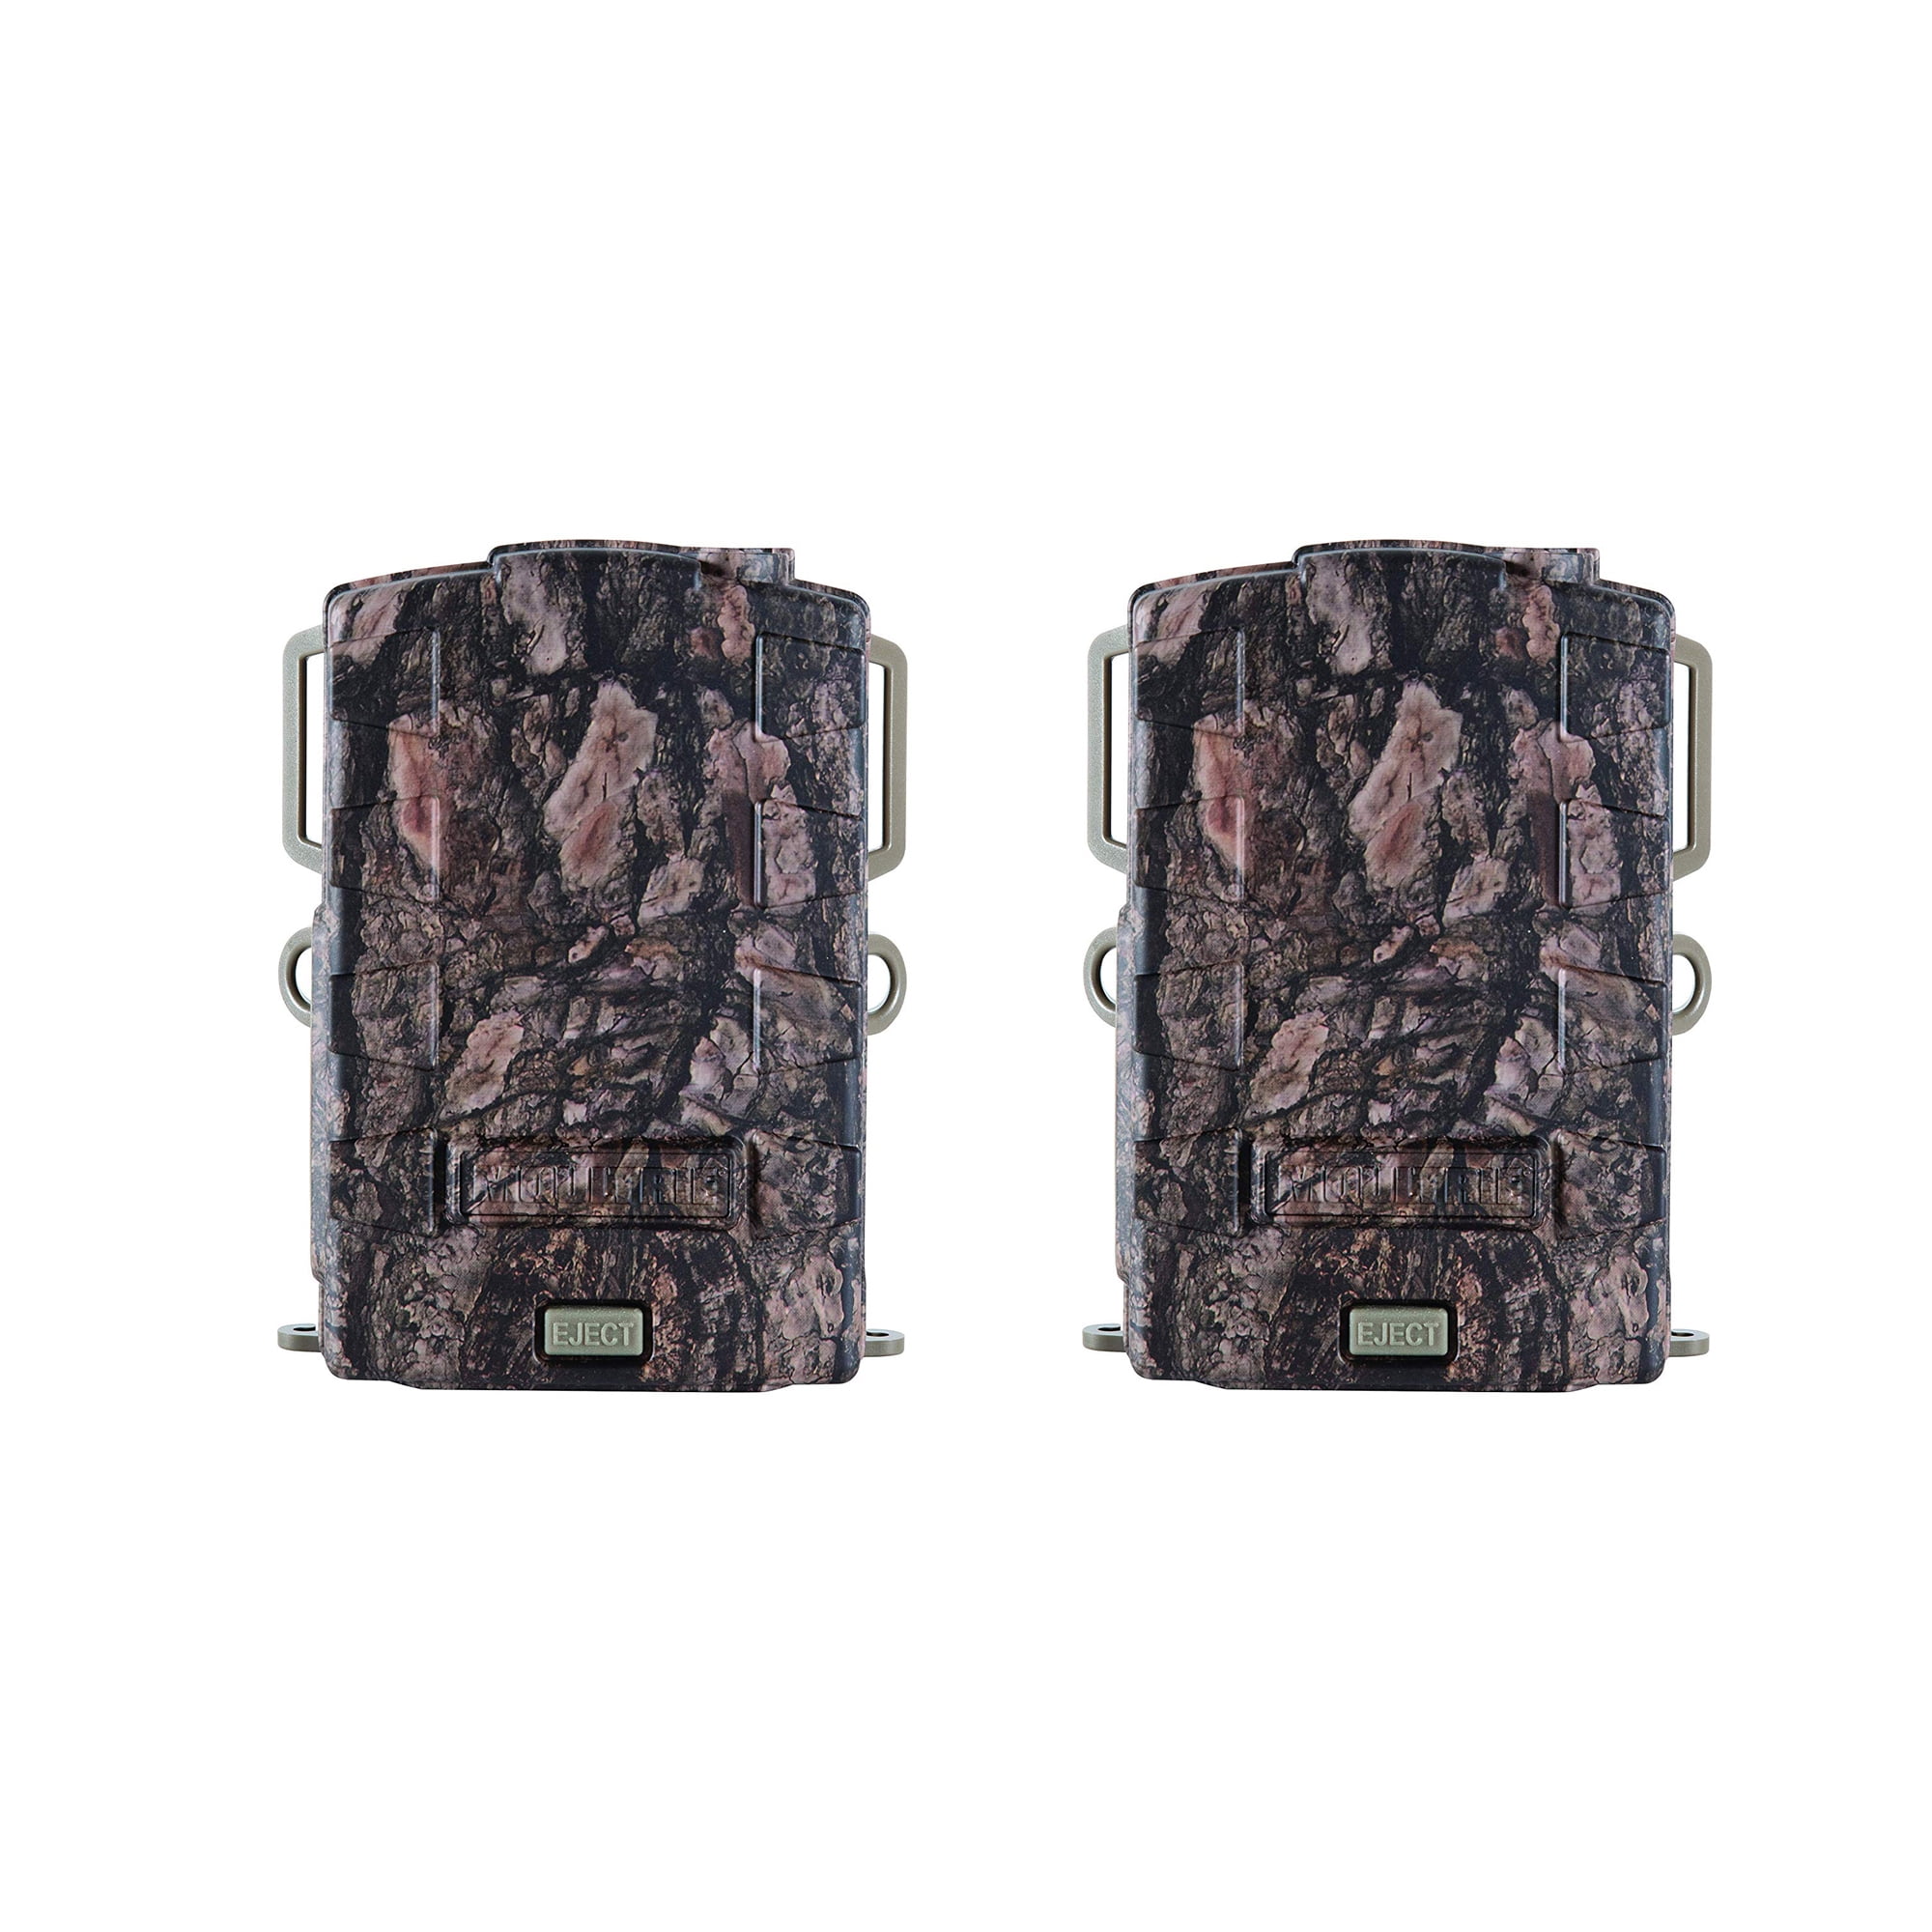 Moultrie Mobile Delta Cellular Trail Game Scouting Camera AT&T LTE 32MP 